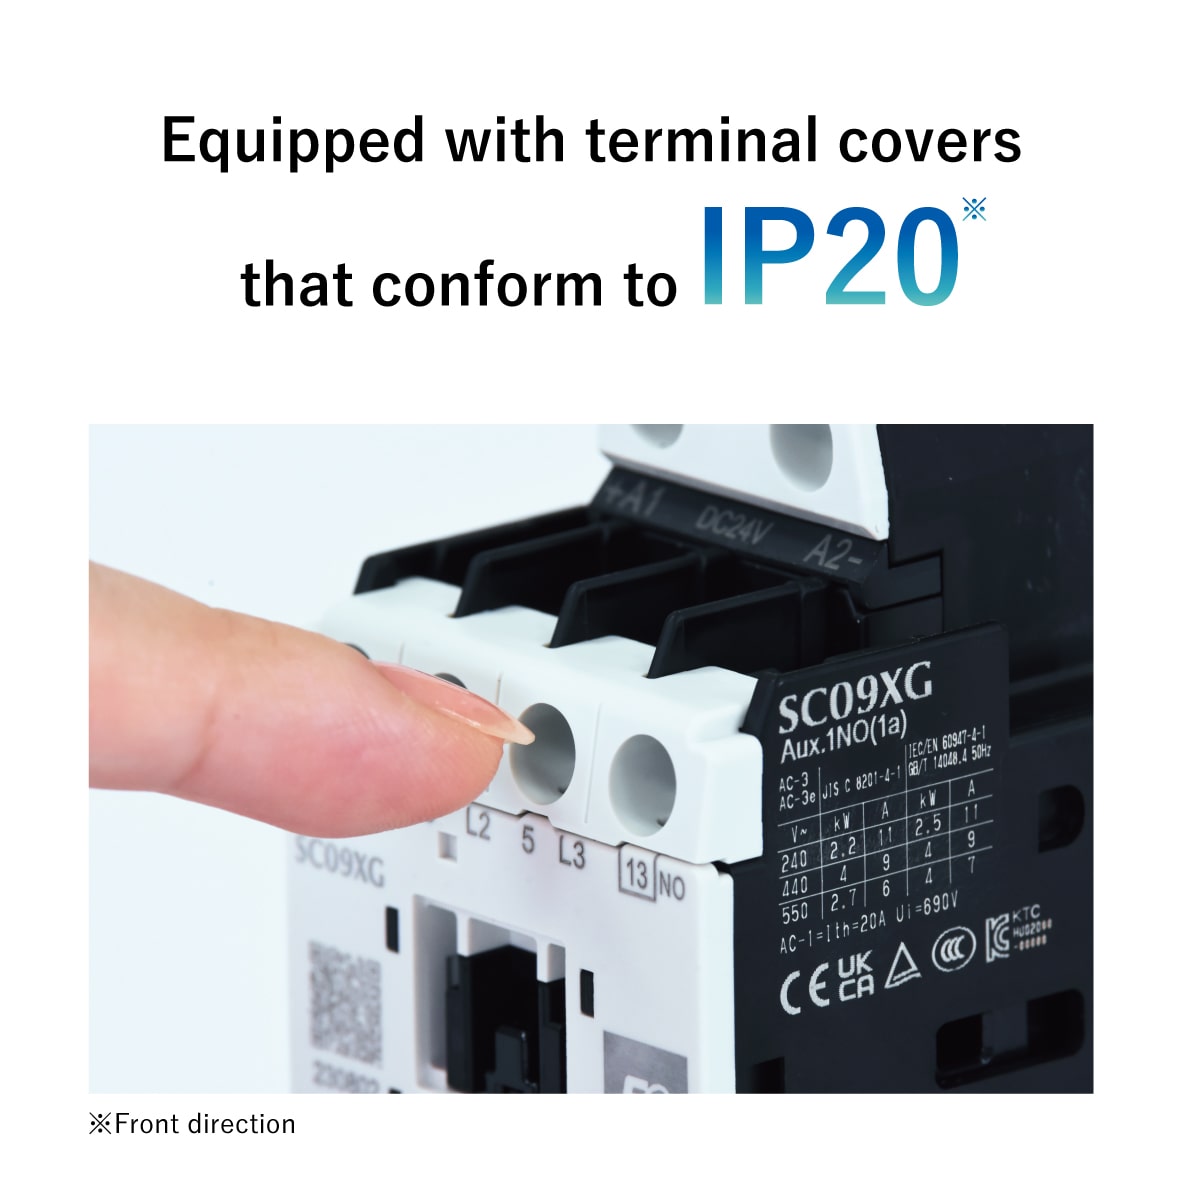 Equipped with terminal covers that conform to IP20